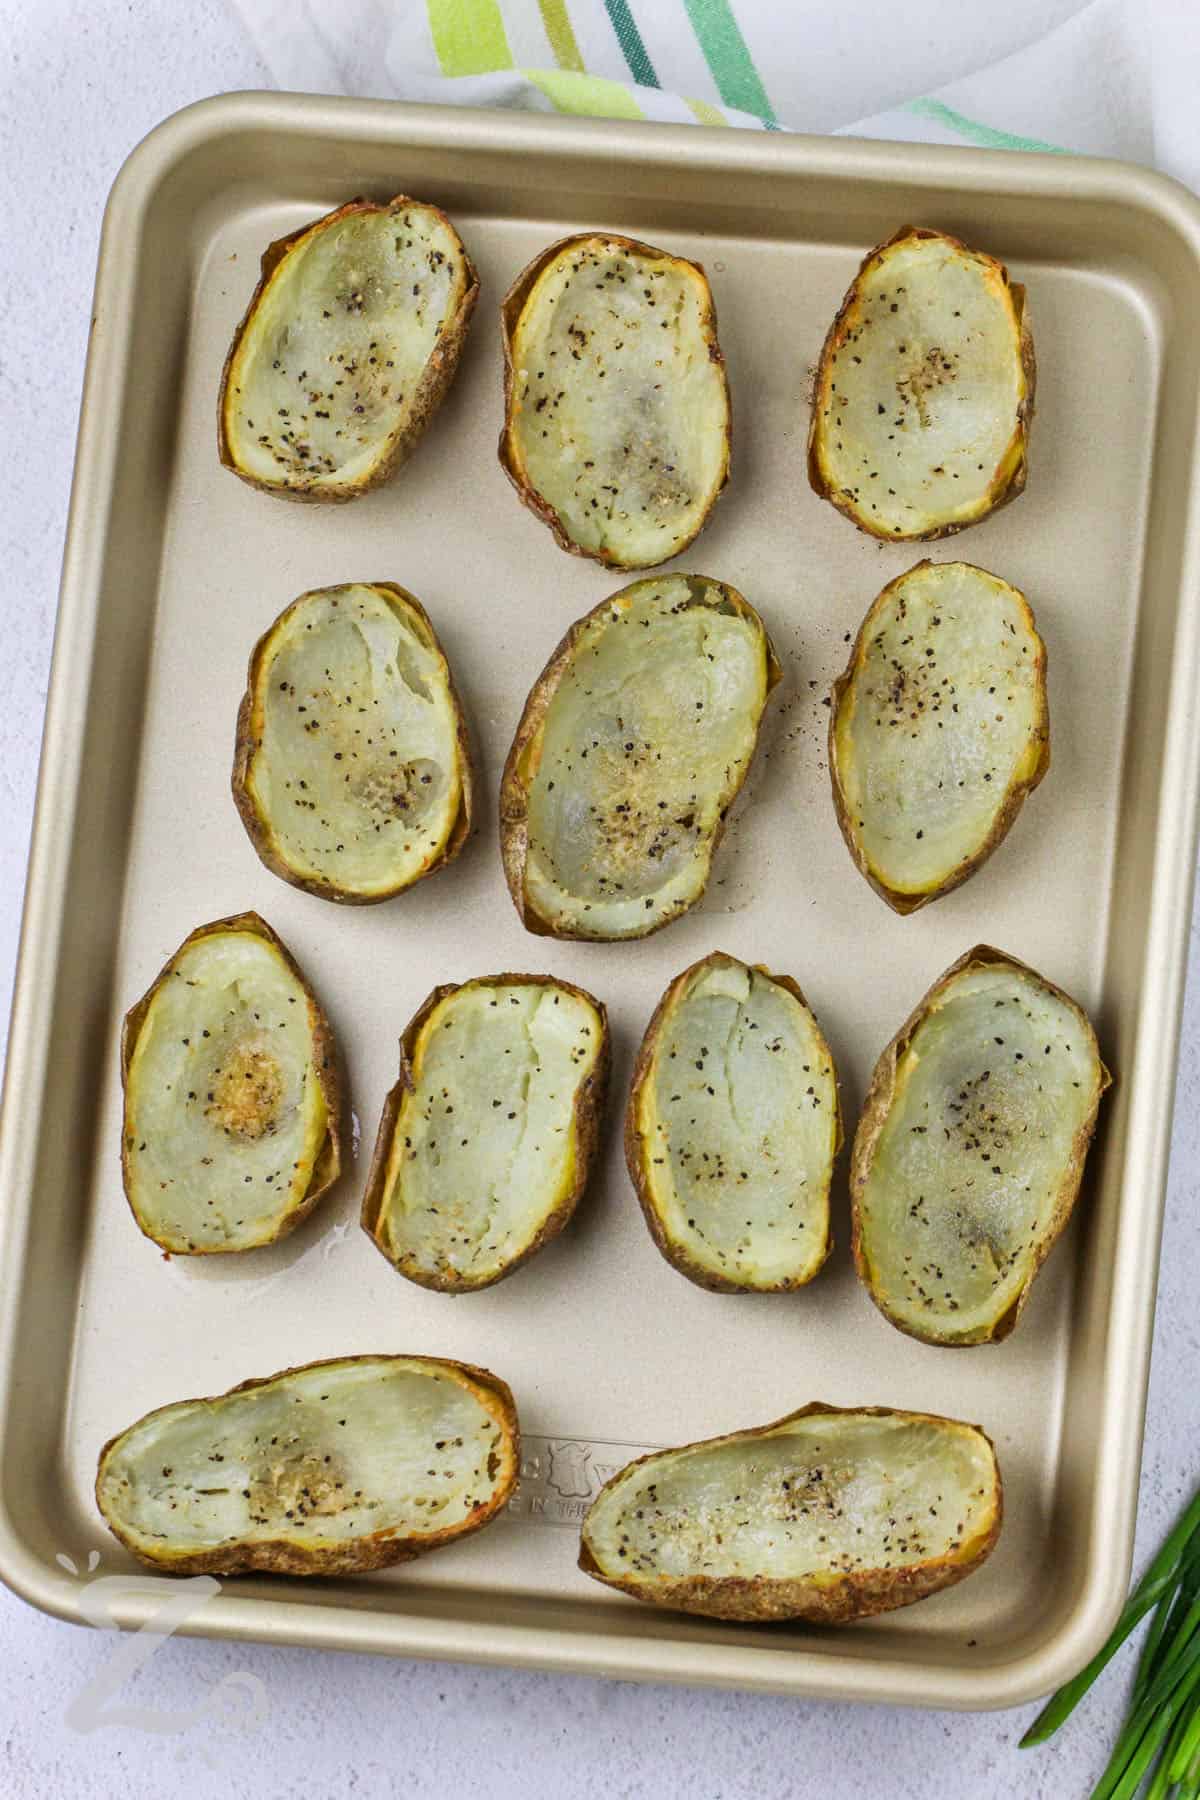 cooked potato skins before adding toppings